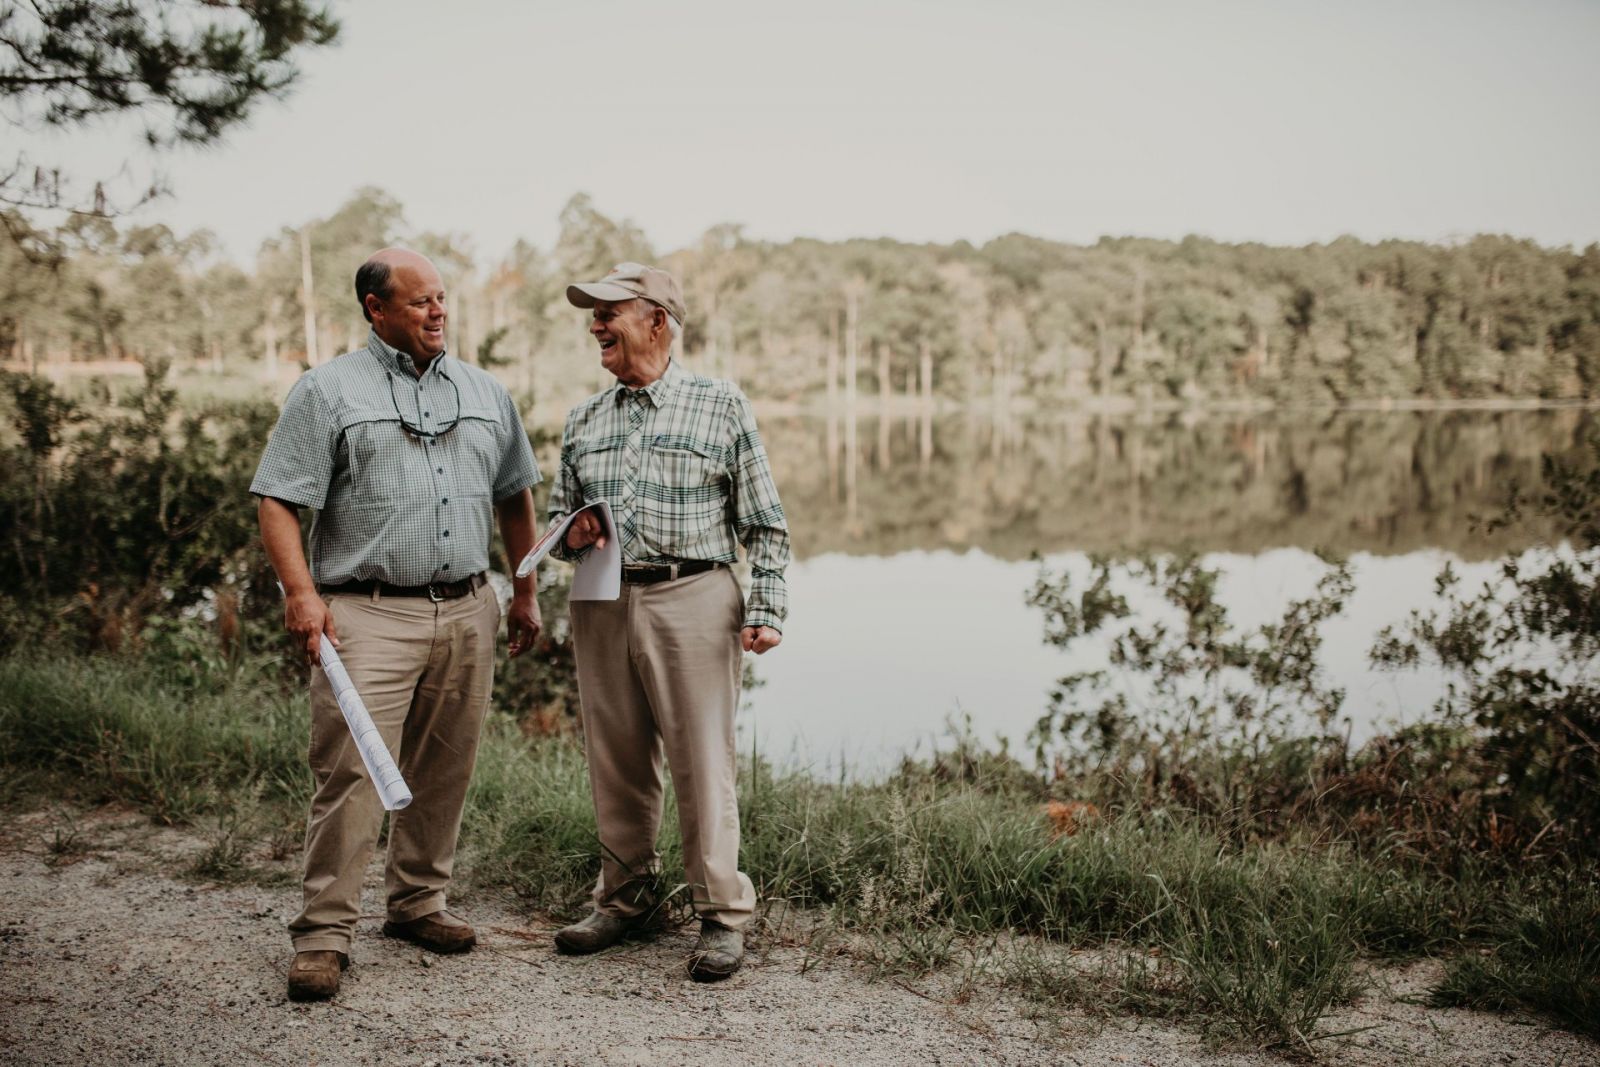 Tombo Milliken (left) and Tom Milliken scout property in Fairfield County for NAI Columbia. The father-son duo has been behind many of the biggest commercial real estate deals in the Midlands and beyond. (Photo/Ashley Wright for NAI Columbia)